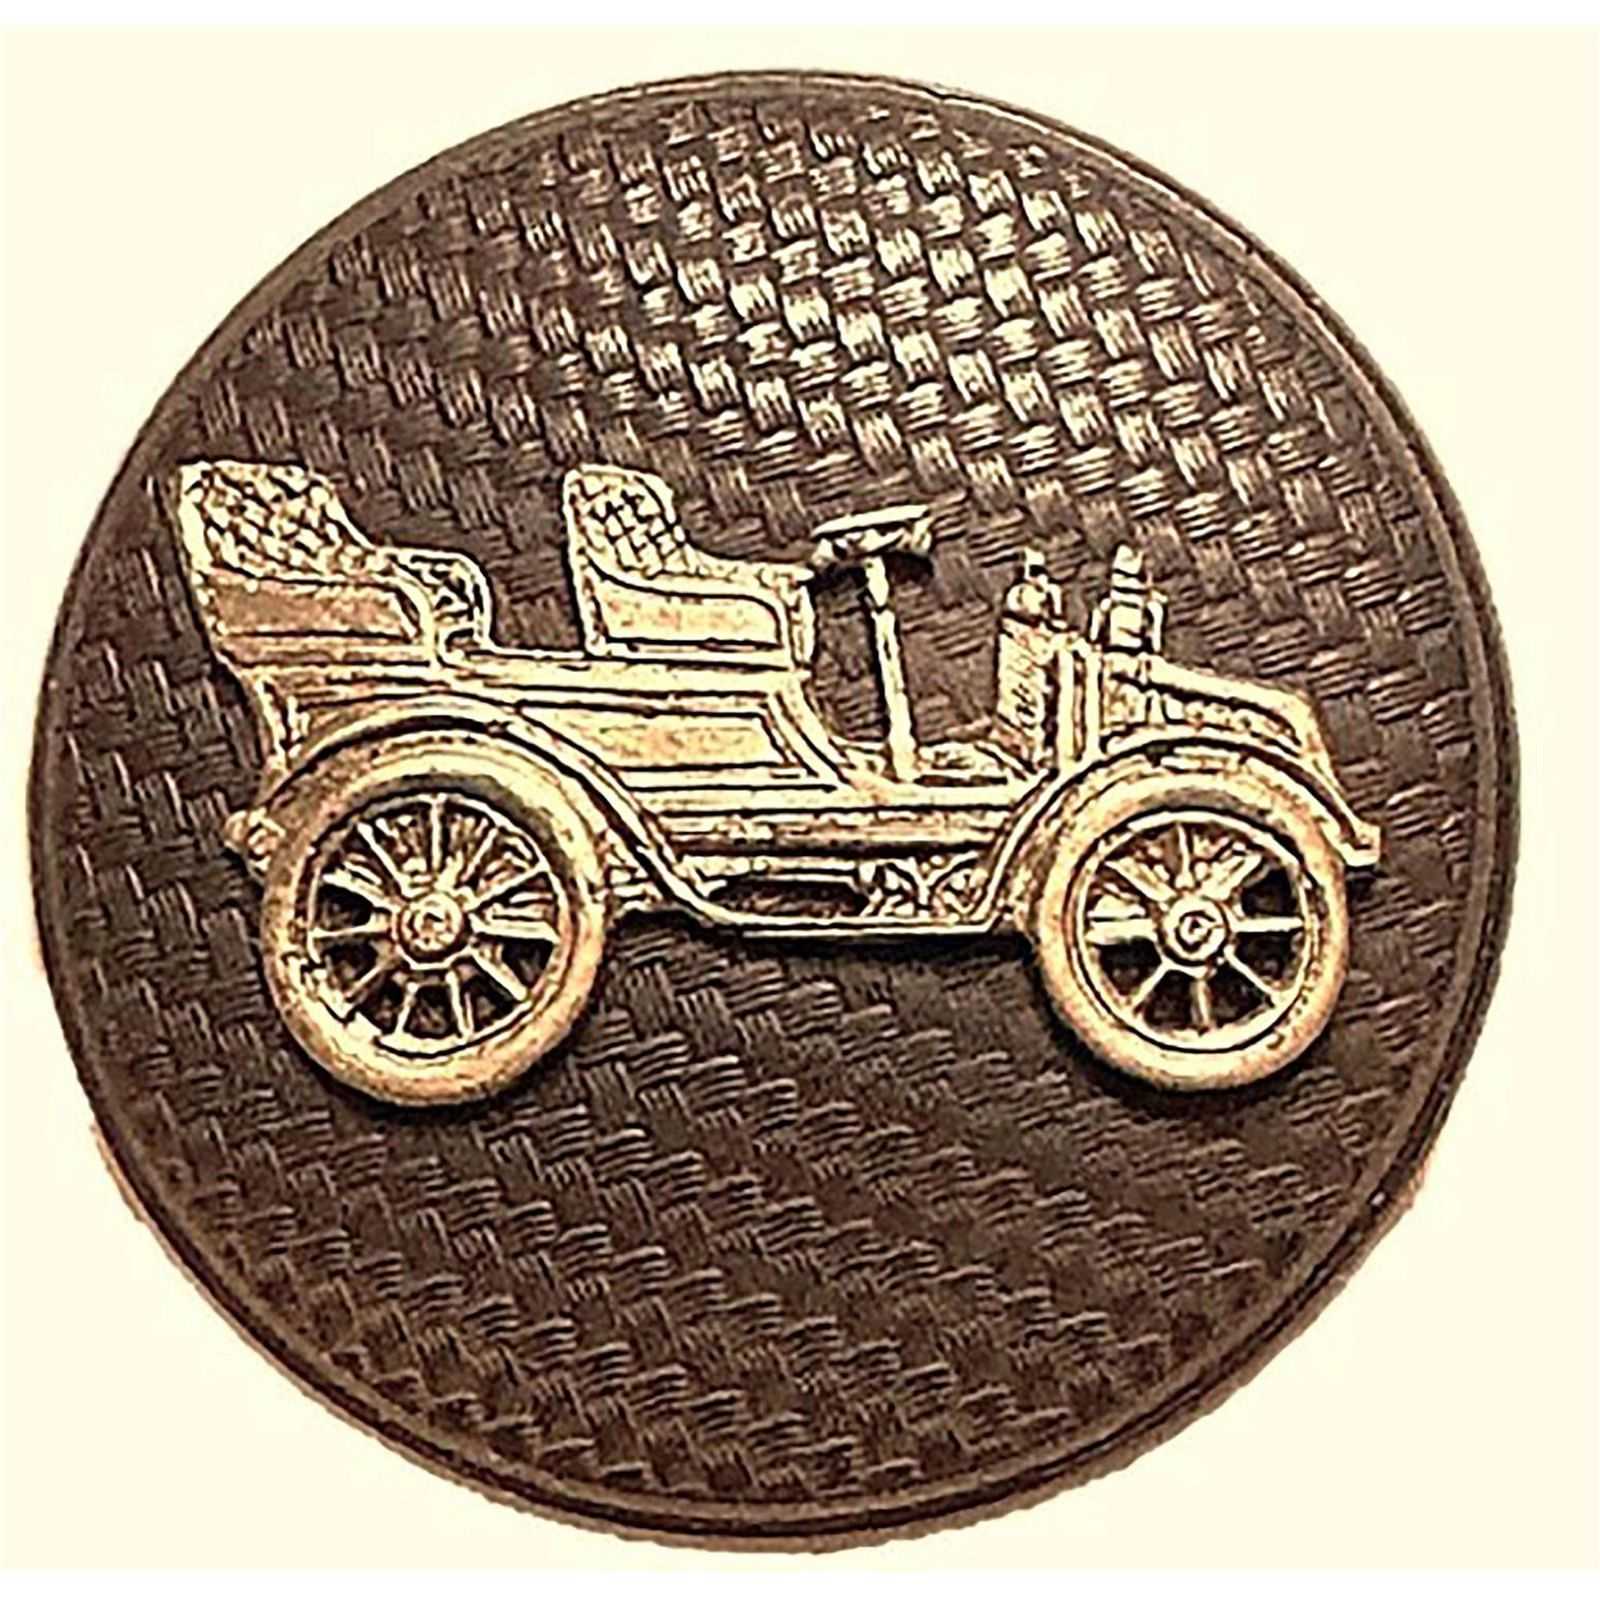 Large early 20th-century button with a vintage car in brass on a Goodyear rubber backing, estimated at $500-$1,500 at Lion and Unicorn.